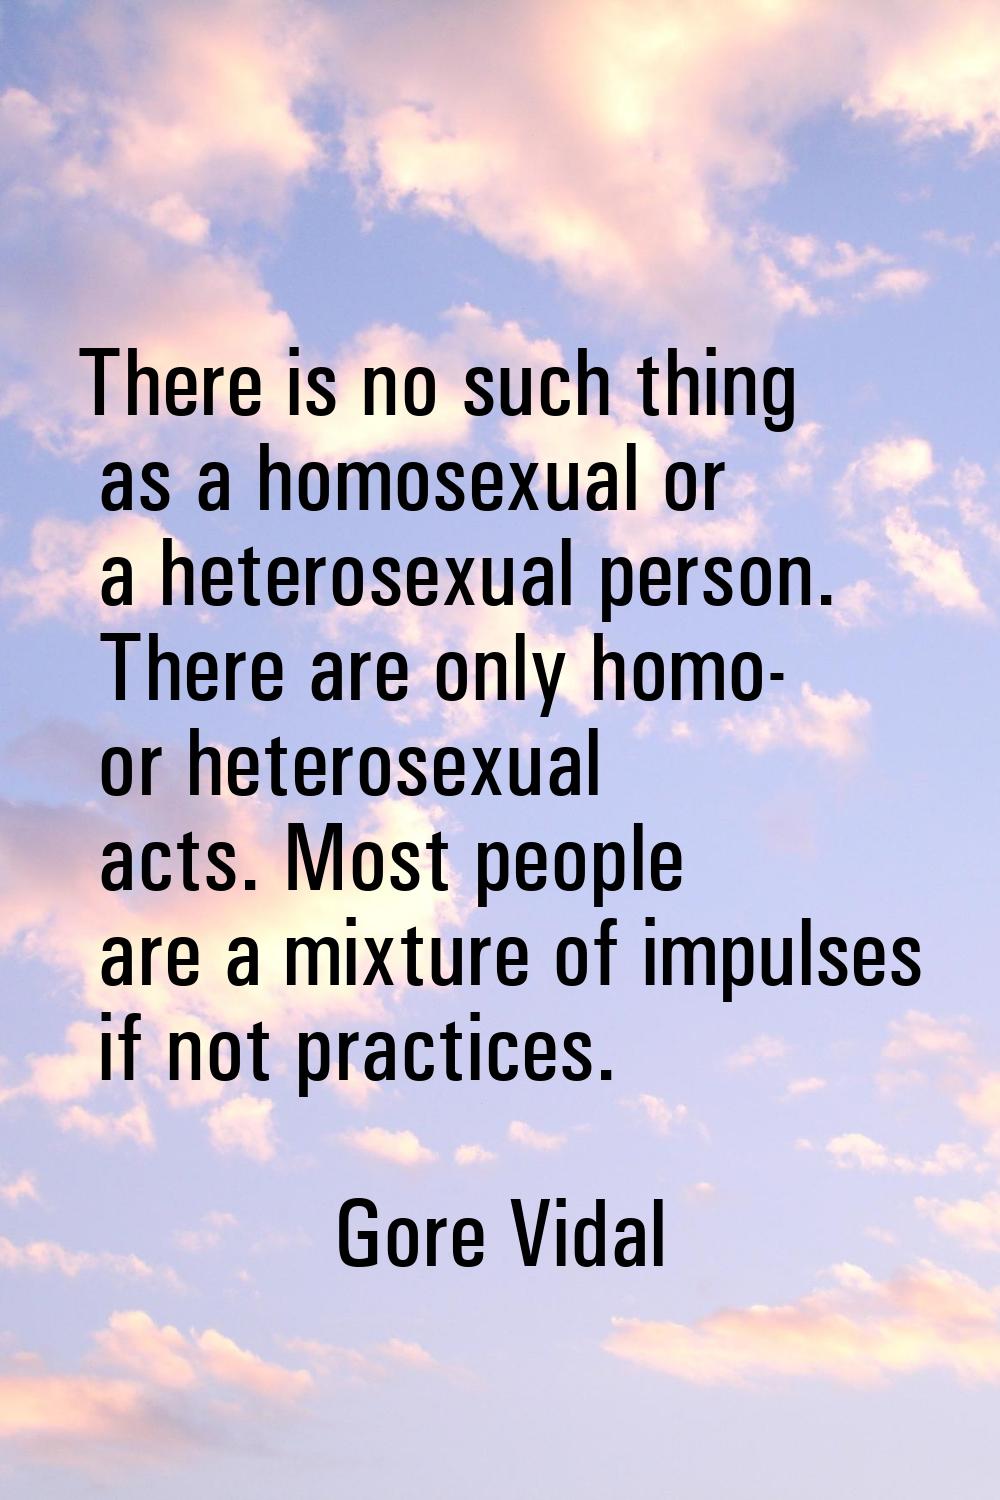 There is no such thing as a homosexual or a heterosexual person. There are only homo- or heterosexu